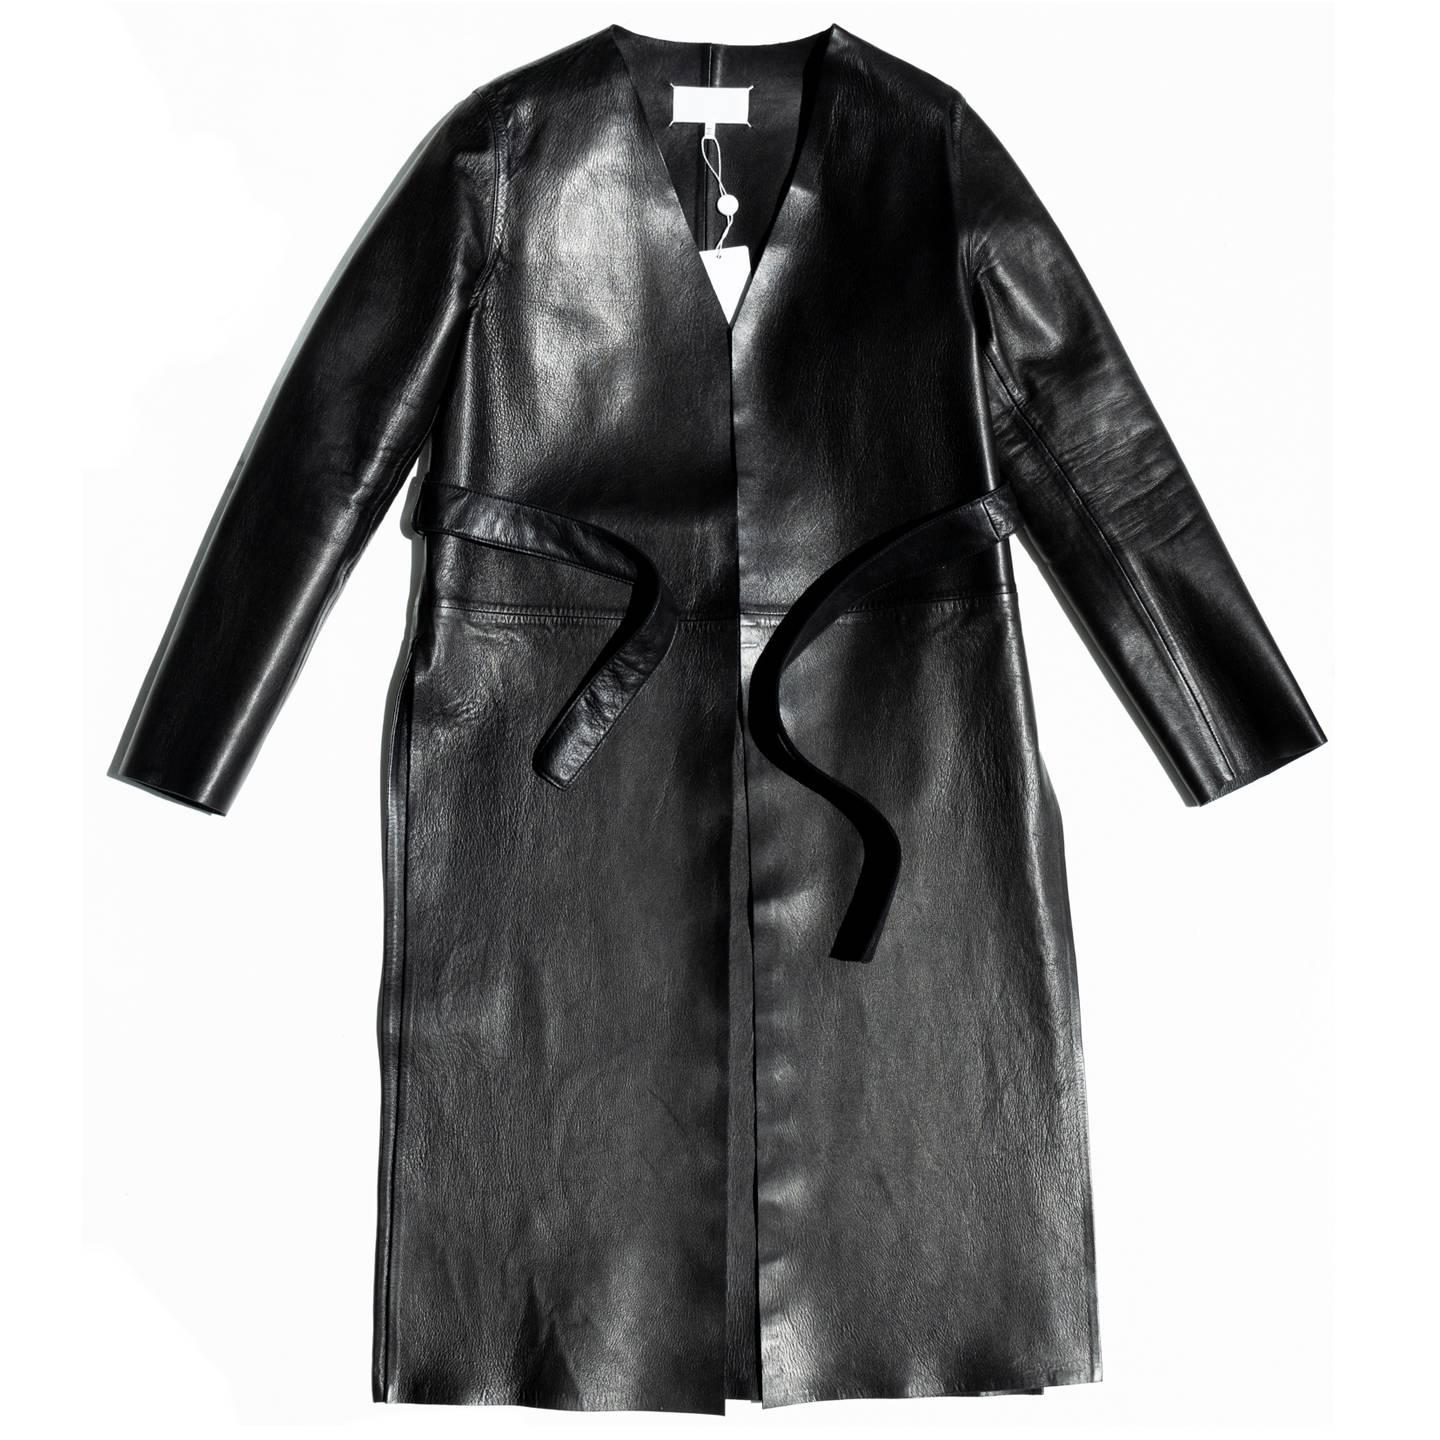 Black lambskin collarless leather coat with matching tie belt around the waist . The front is open and buttonless and enriched by two vertical slits. Made in Italy.

Size  38 French sizing

Condition Excellent: New With Tags